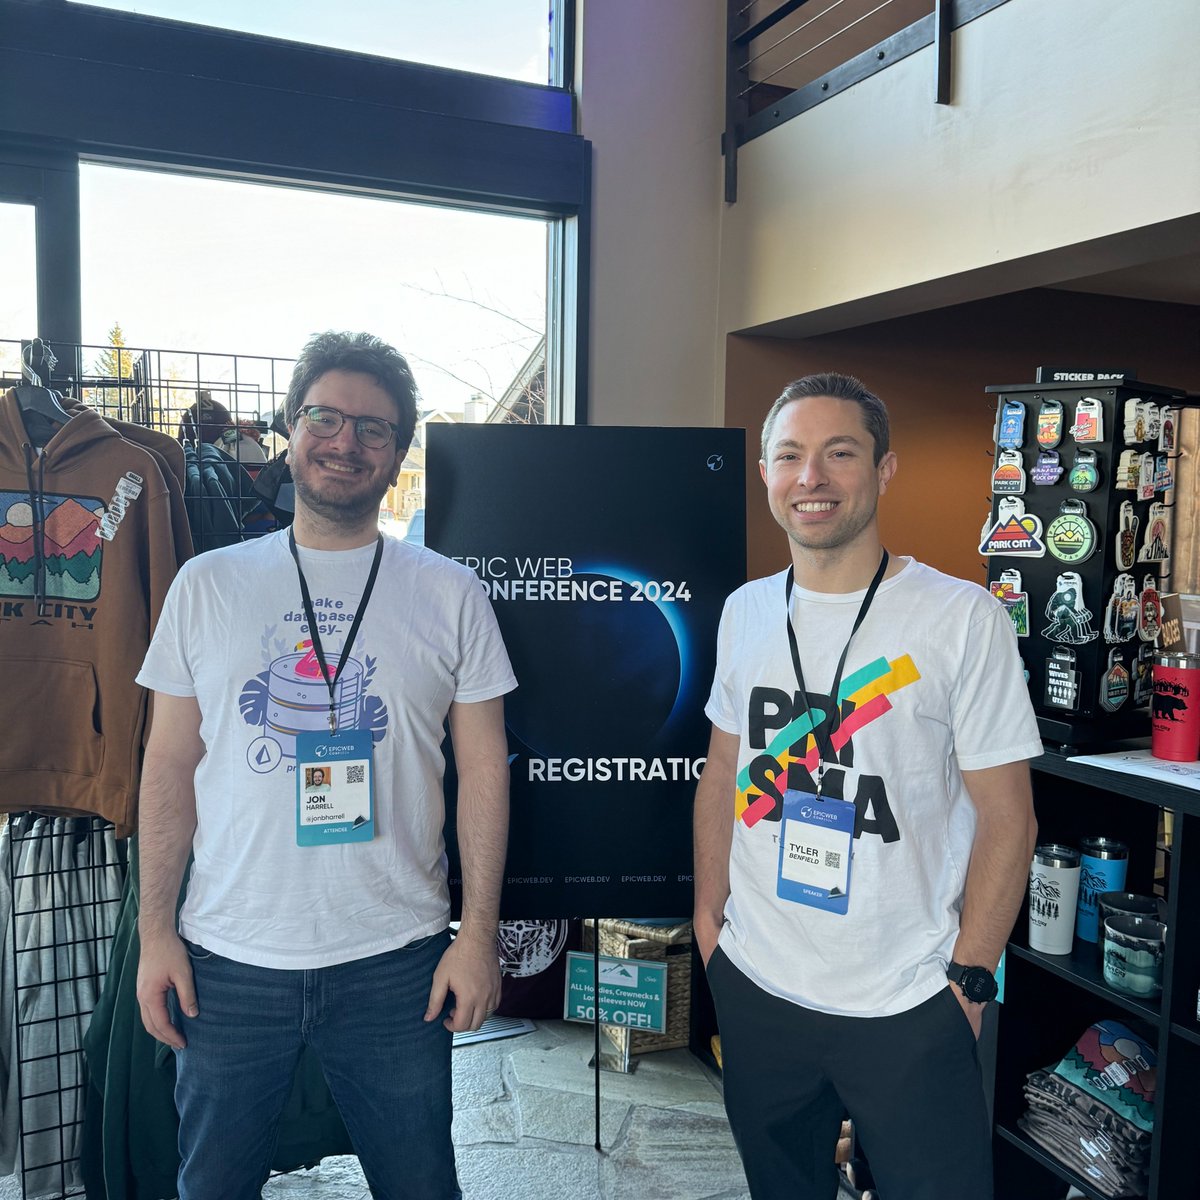 If you're at #EpicWebConf with @kentcdodds today, come say hi to @rtbenfield and @jonbharrell! 👋 Tyler will take the stage at 4:10pm MT for his talk 'Epic app performance starts with the database'. 📺 Couldn’t make it in person? Check the livestream! epicweb.dev/conf